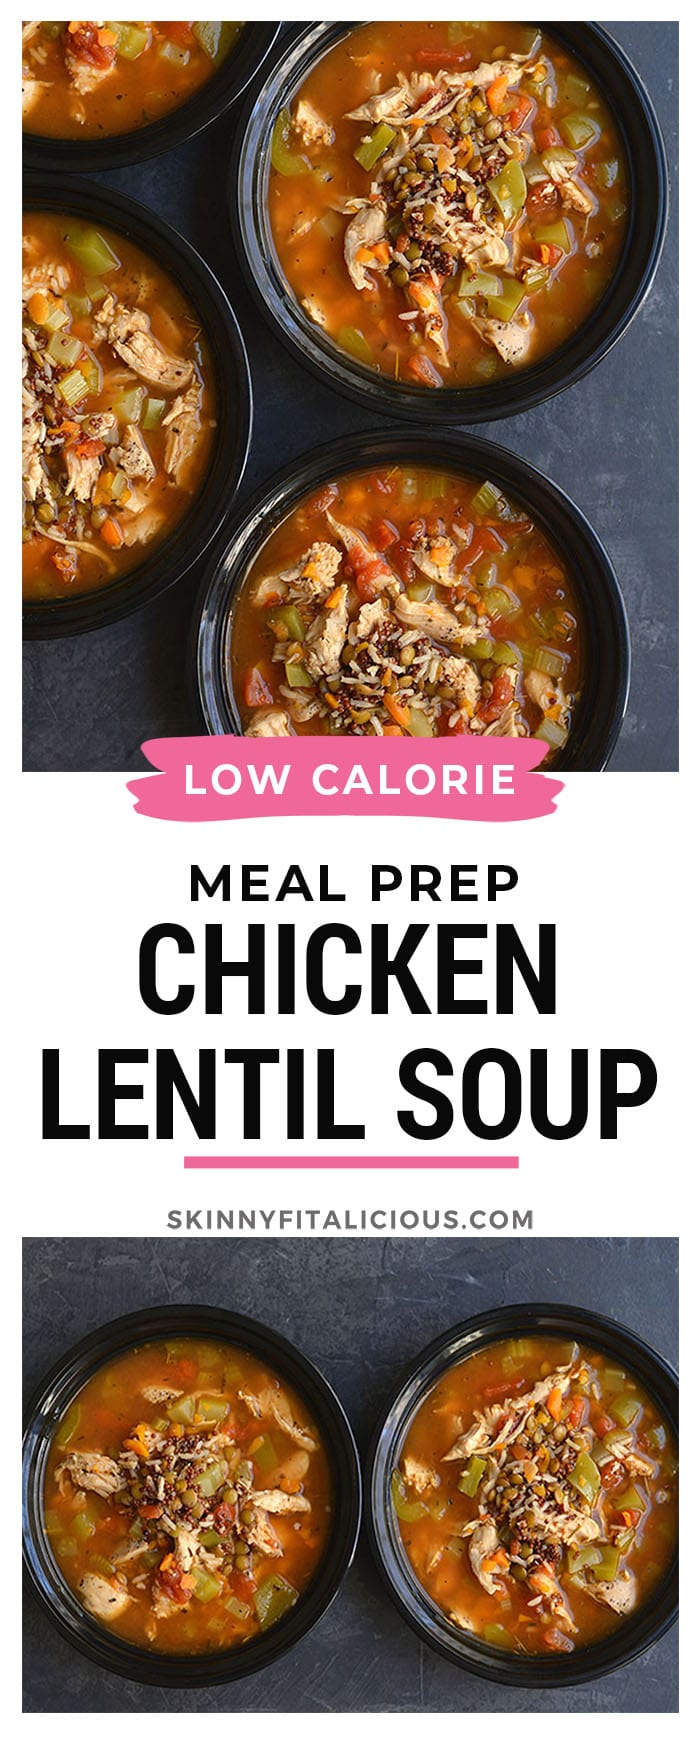 This Meal Prep Chicken Lentil Soup is a nutritious bowl of vegetables, rice and lentils. Nourishing, comforting and takes less than 30 minutes to make. A delicious bowl of warmth for a cold day! Gluten Free + Low Calorie